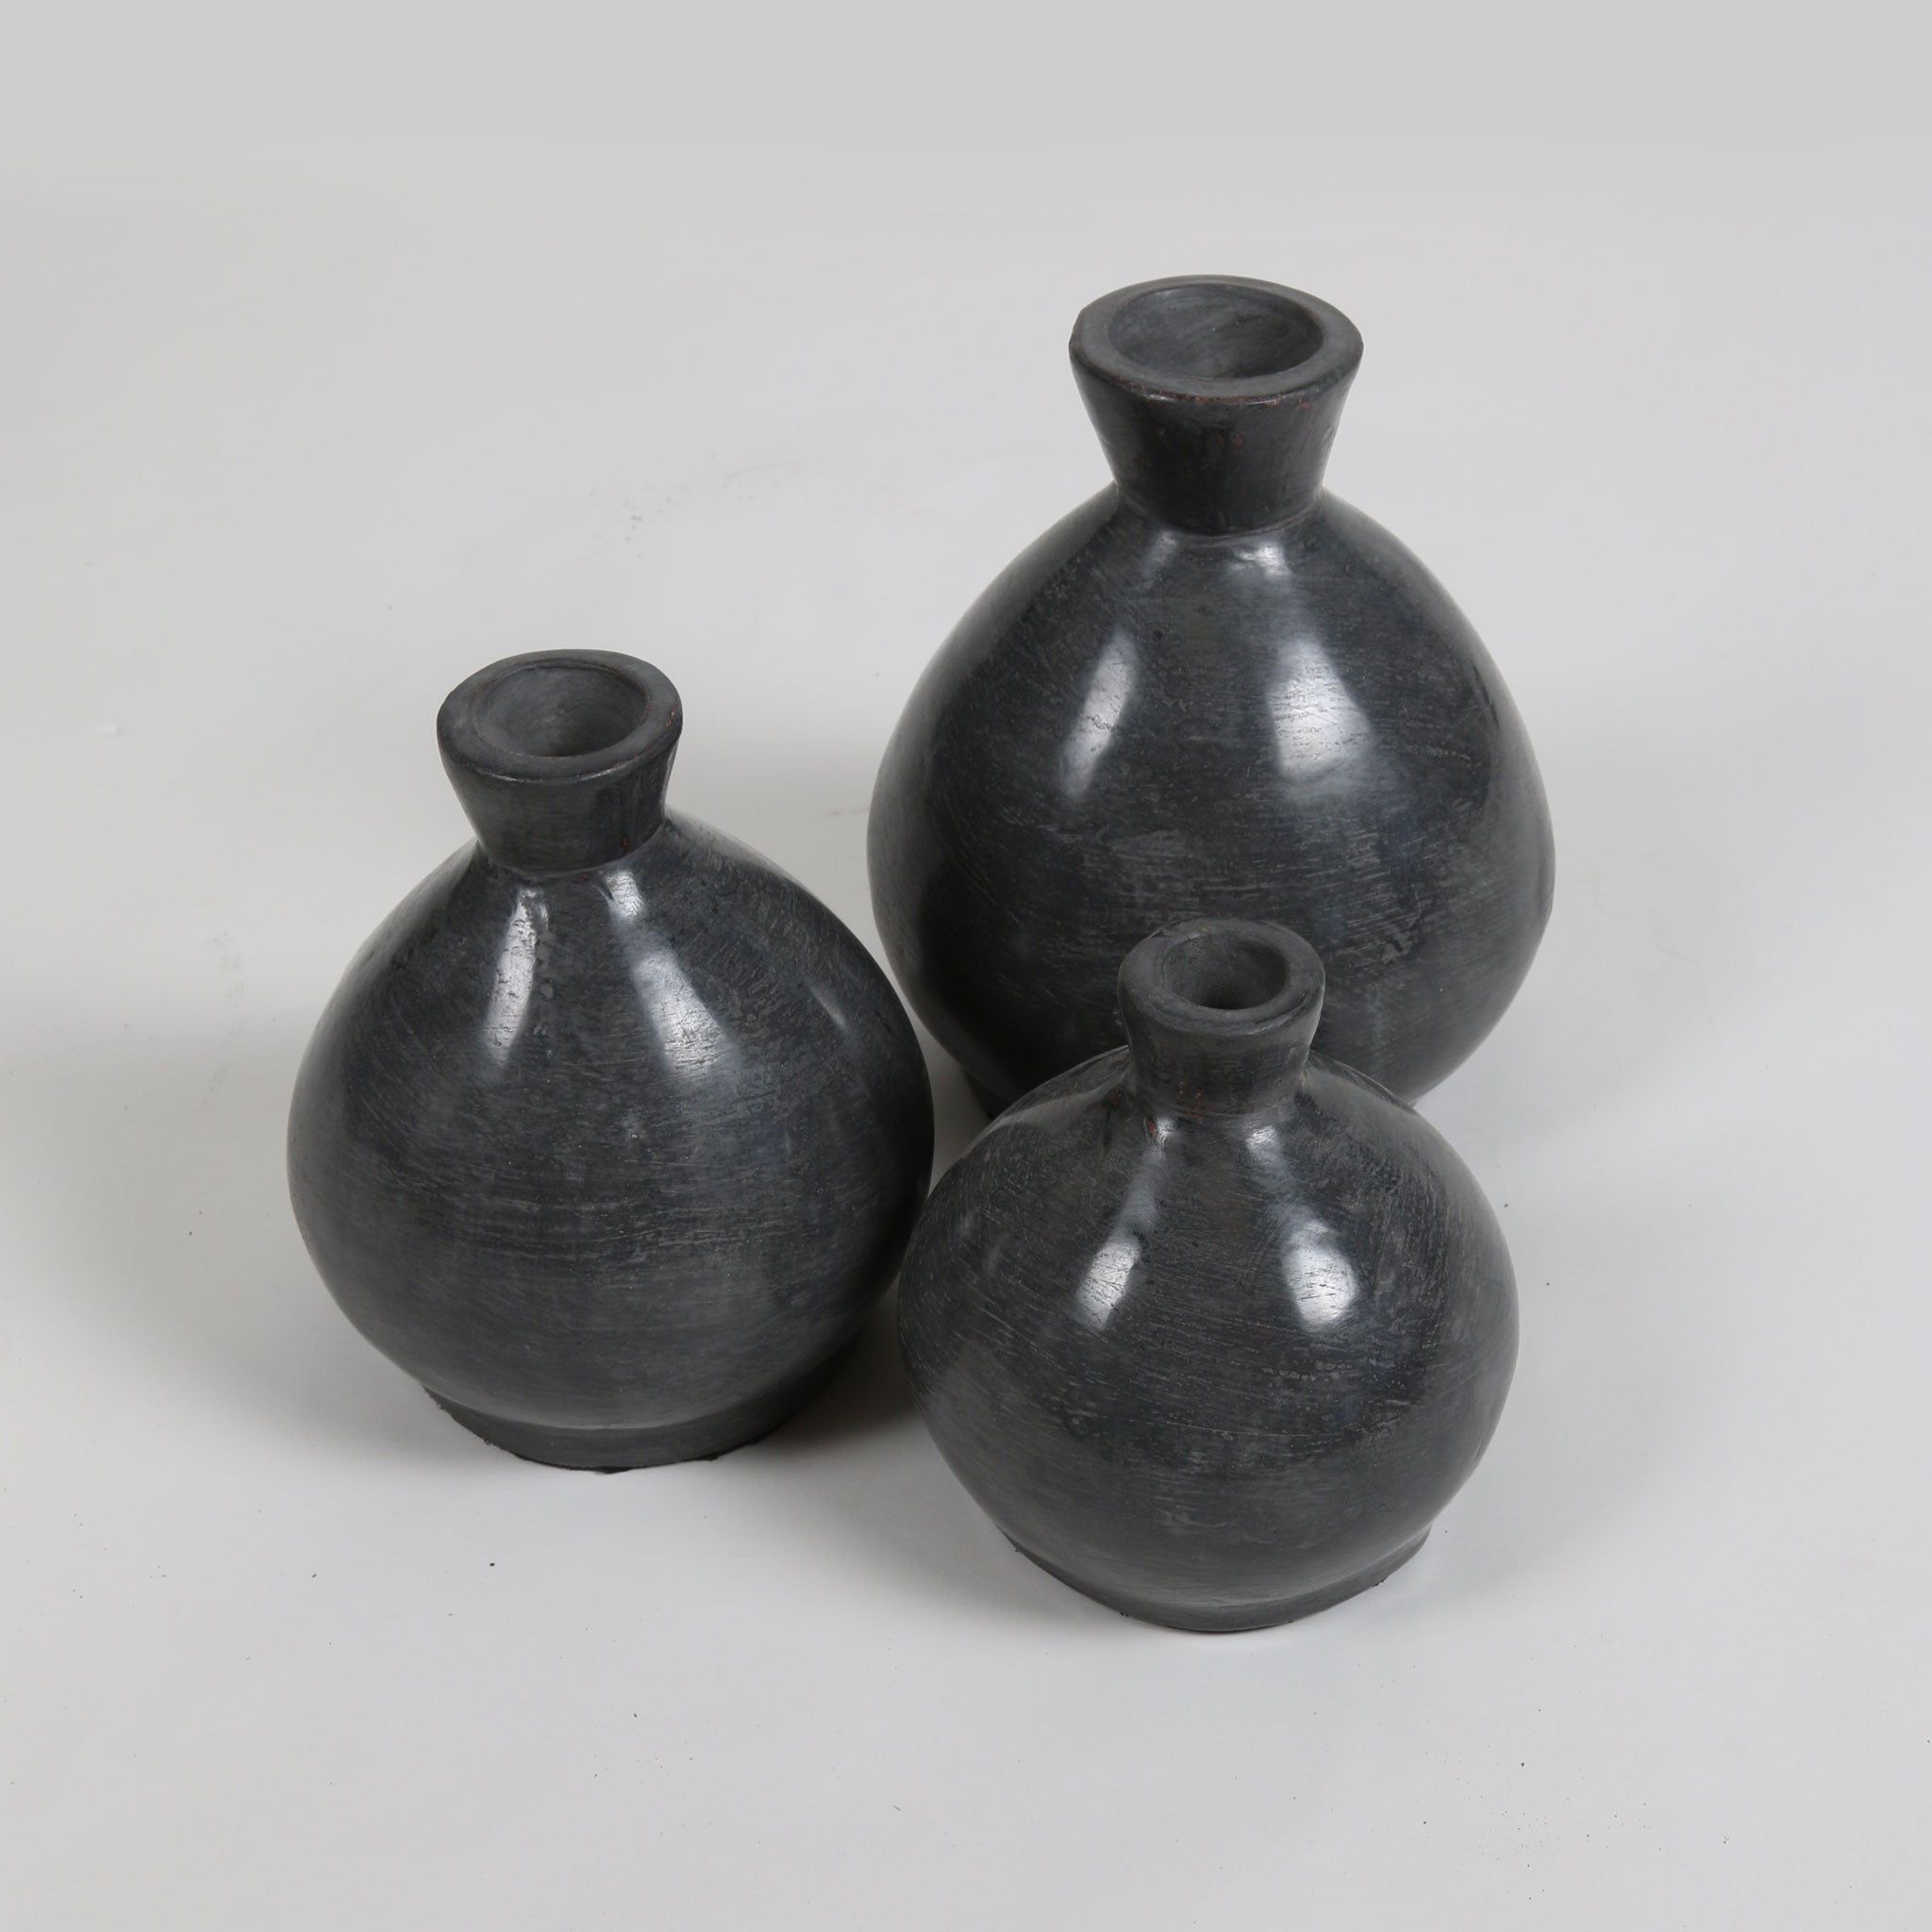 Distressed Black and Grey Pottery Vase